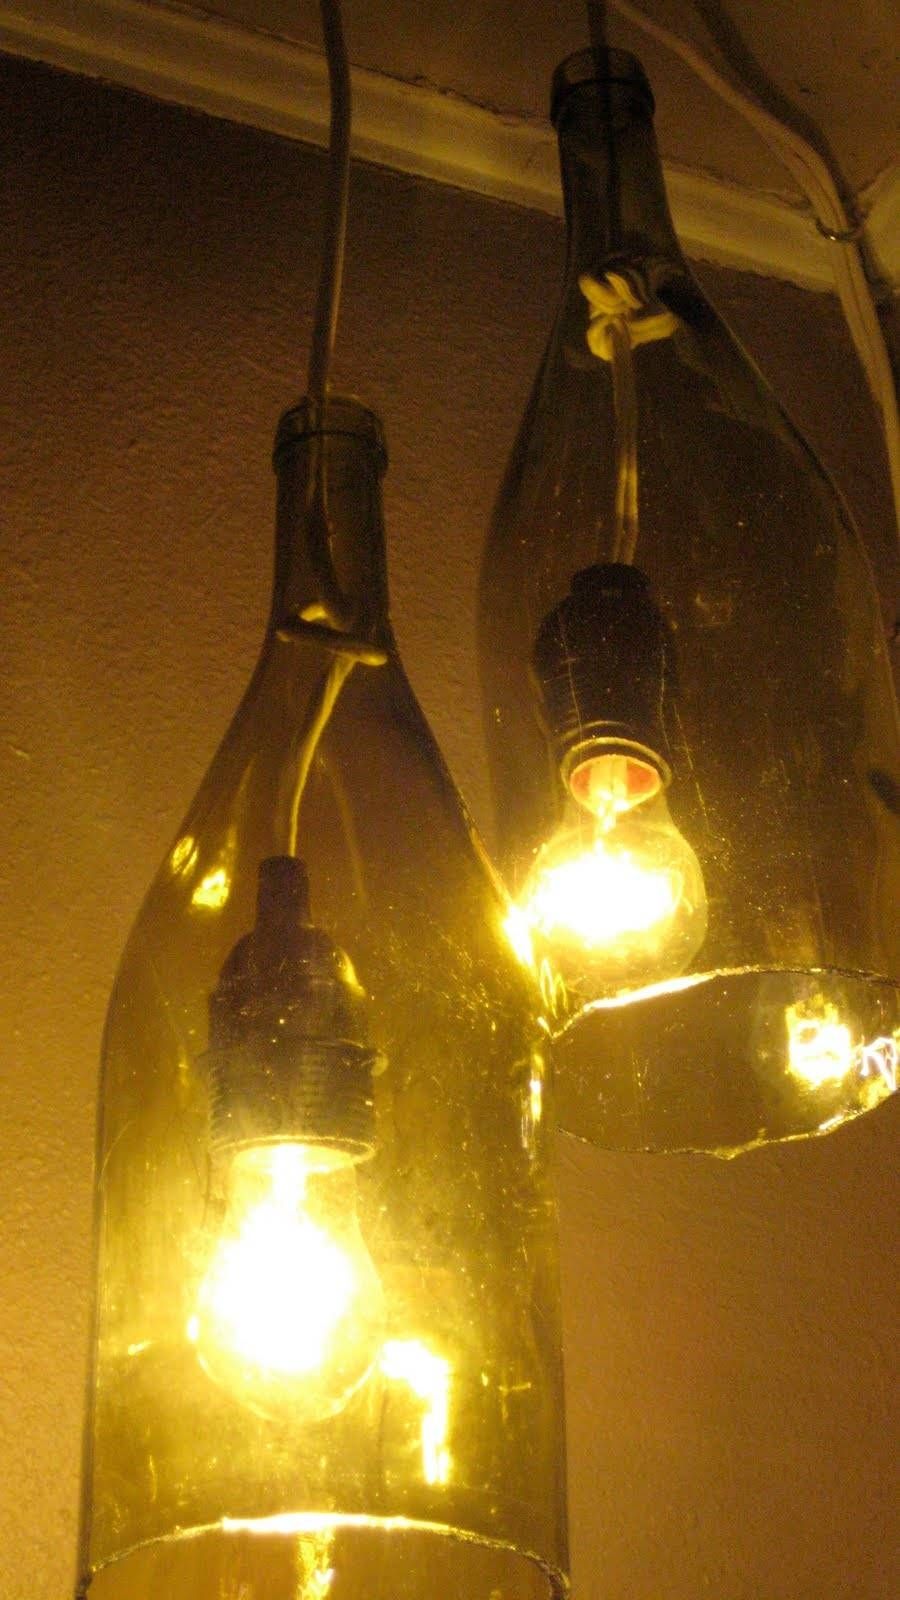 Remodelaholic | 14 Great Diy Pendant Lights And Link Party With Regard To Wine Bottle Pendant Lights (View 15 of 15)